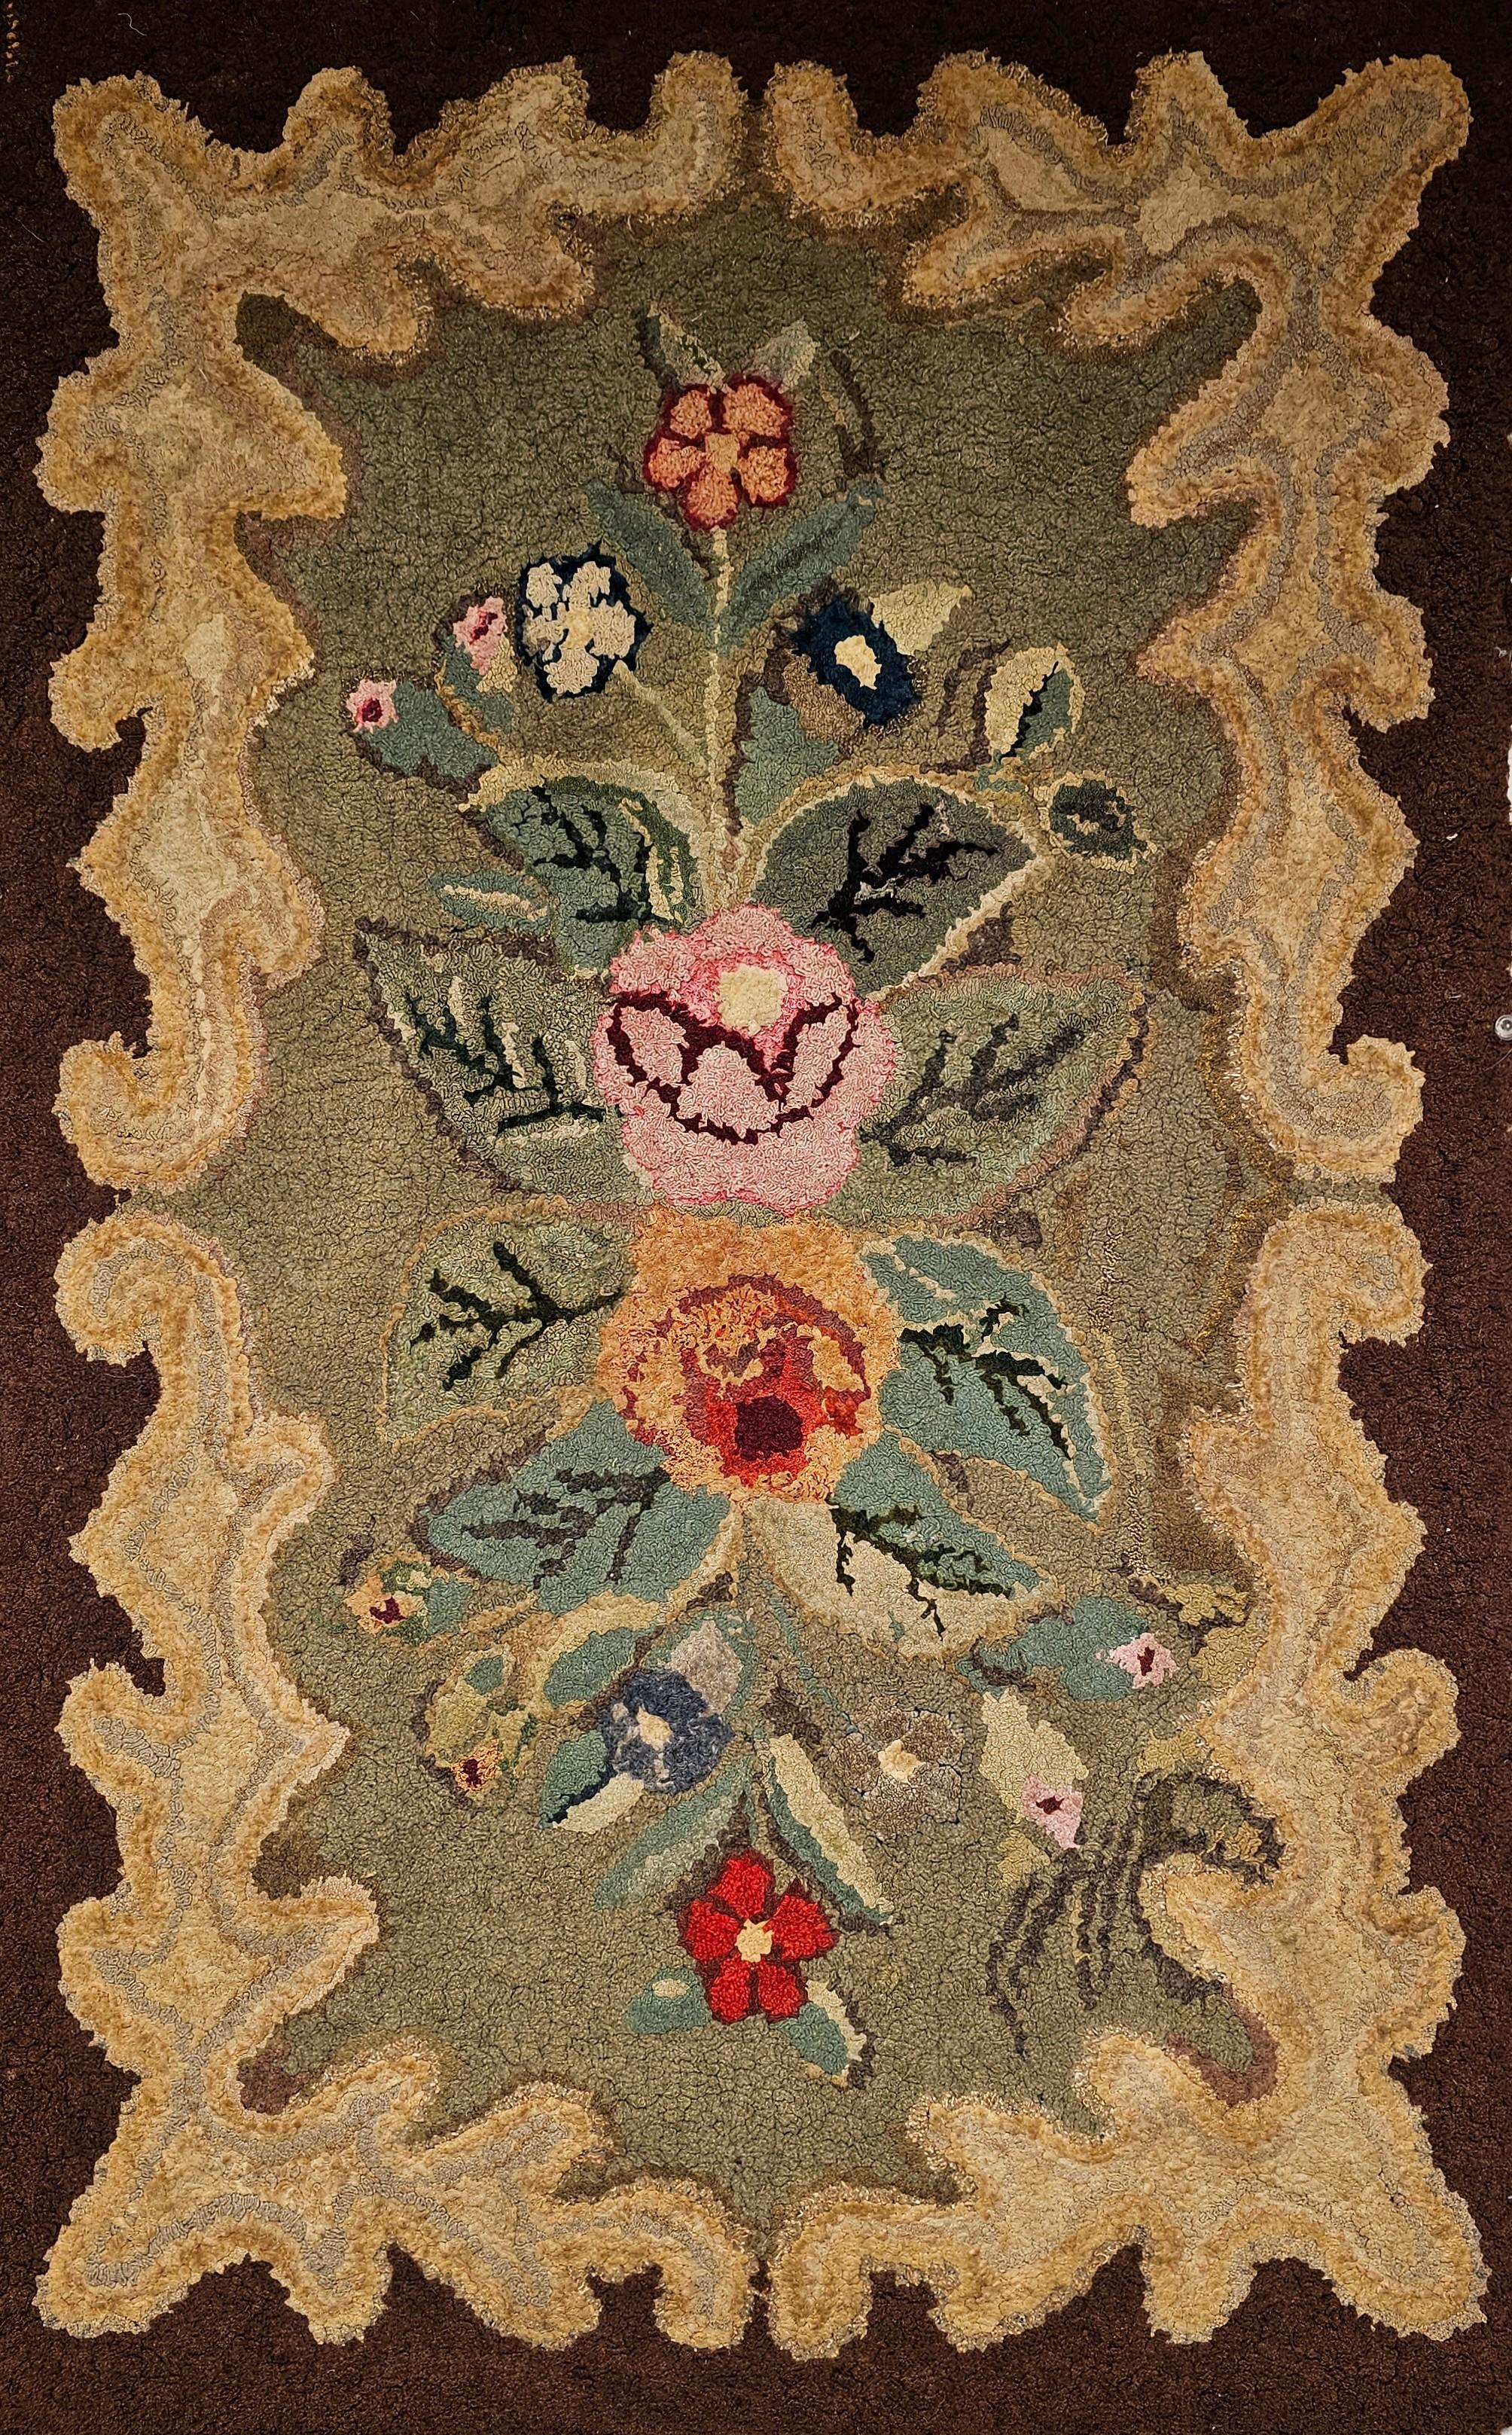 Beautiful early American hand hooked rug was handcrafted in the early 1900s in the New England Area of the United States. It has a floral pattern with flowers in brilliant vintage colors. The Antique Hooked Rugs are a combination of Folk Art